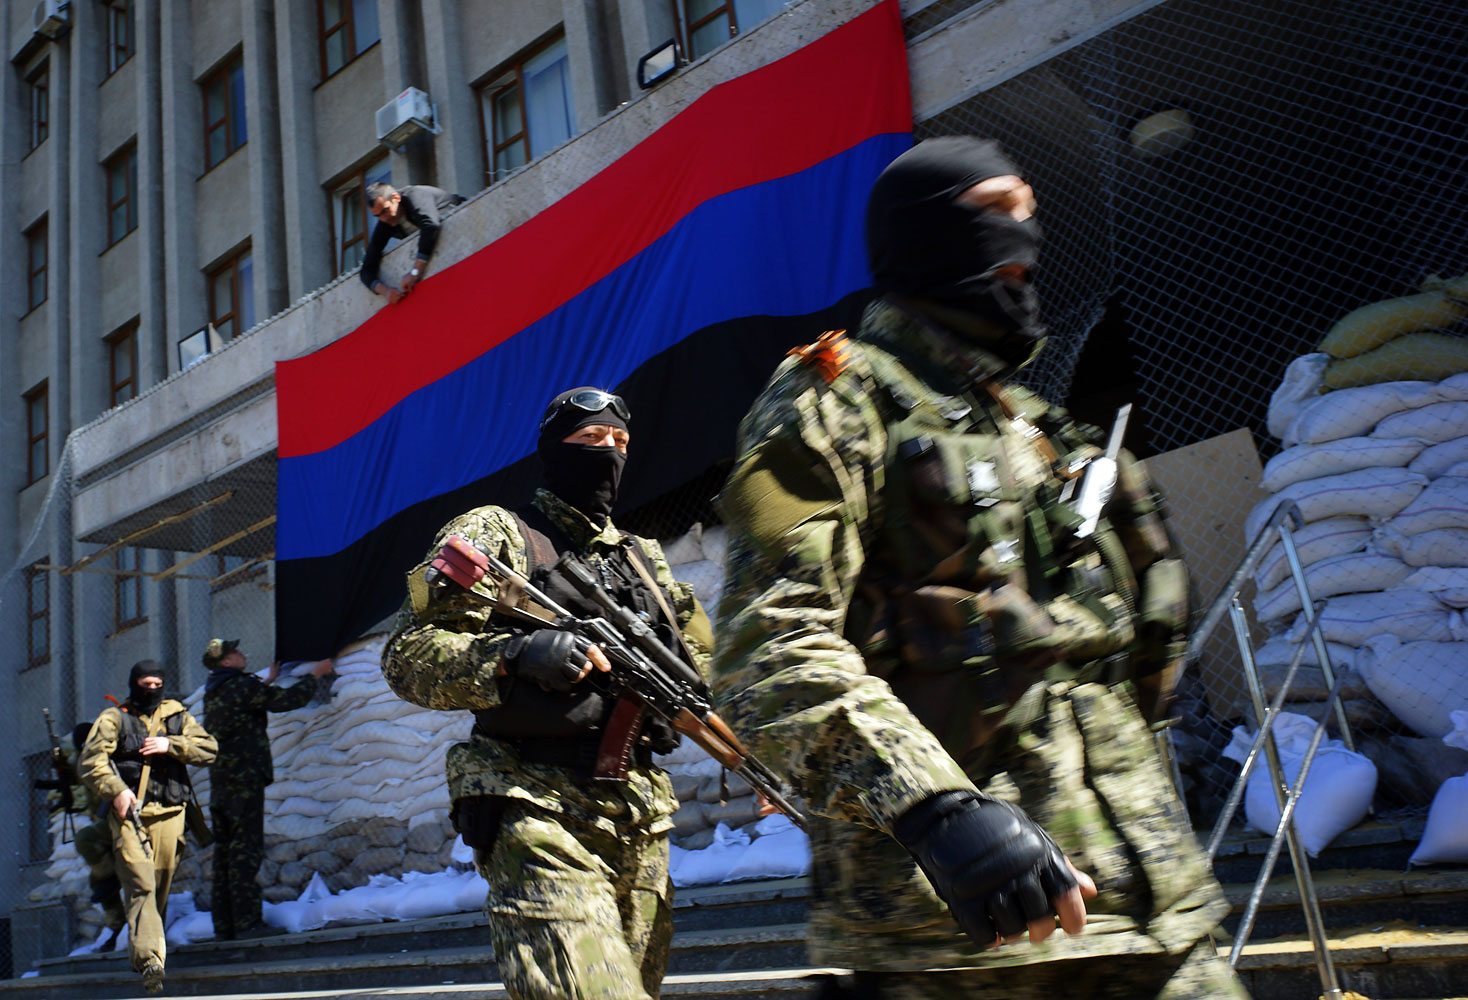 A pro-Russia activist hangs a flag of the so-called "People's Republic of Donetsk" on the regional administration building seized by separatists as armed men in military fatigues guard the premises in the eastern Ukrainian city of Slavyansk on April 21, 2014.